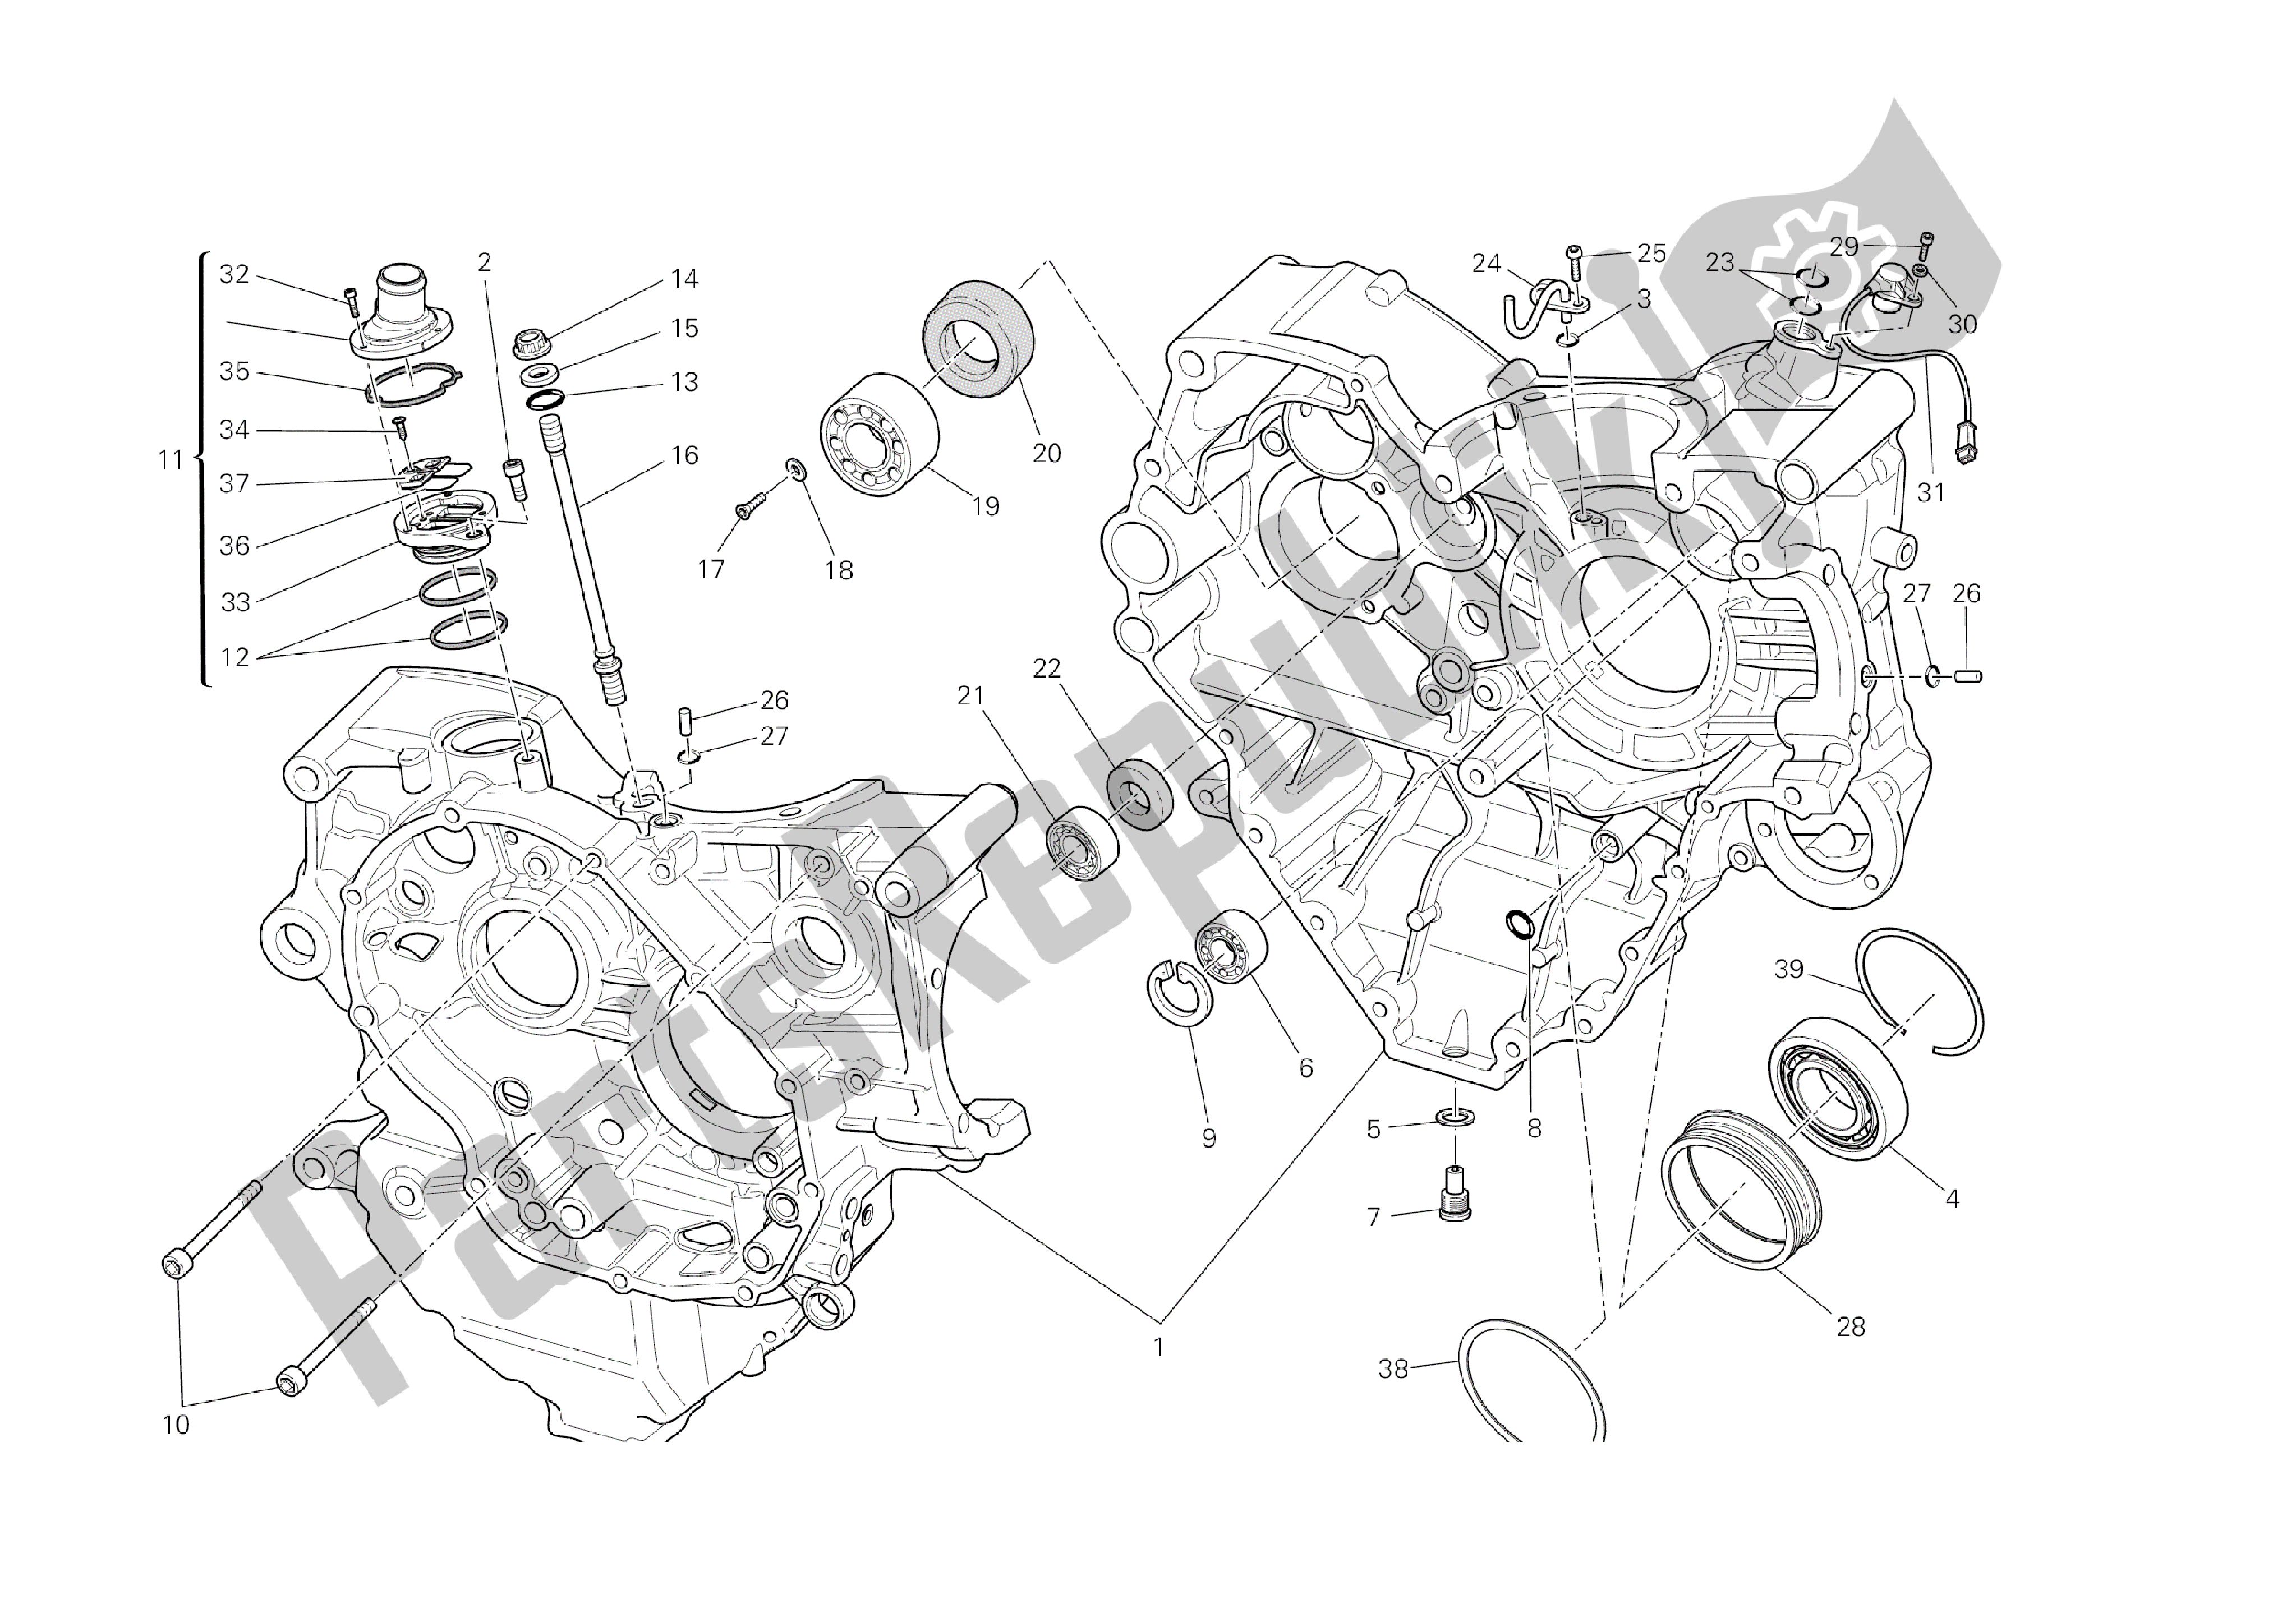 All parts for the Half-crankcases Pair of the Ducati Diavel Dark 1200 2013